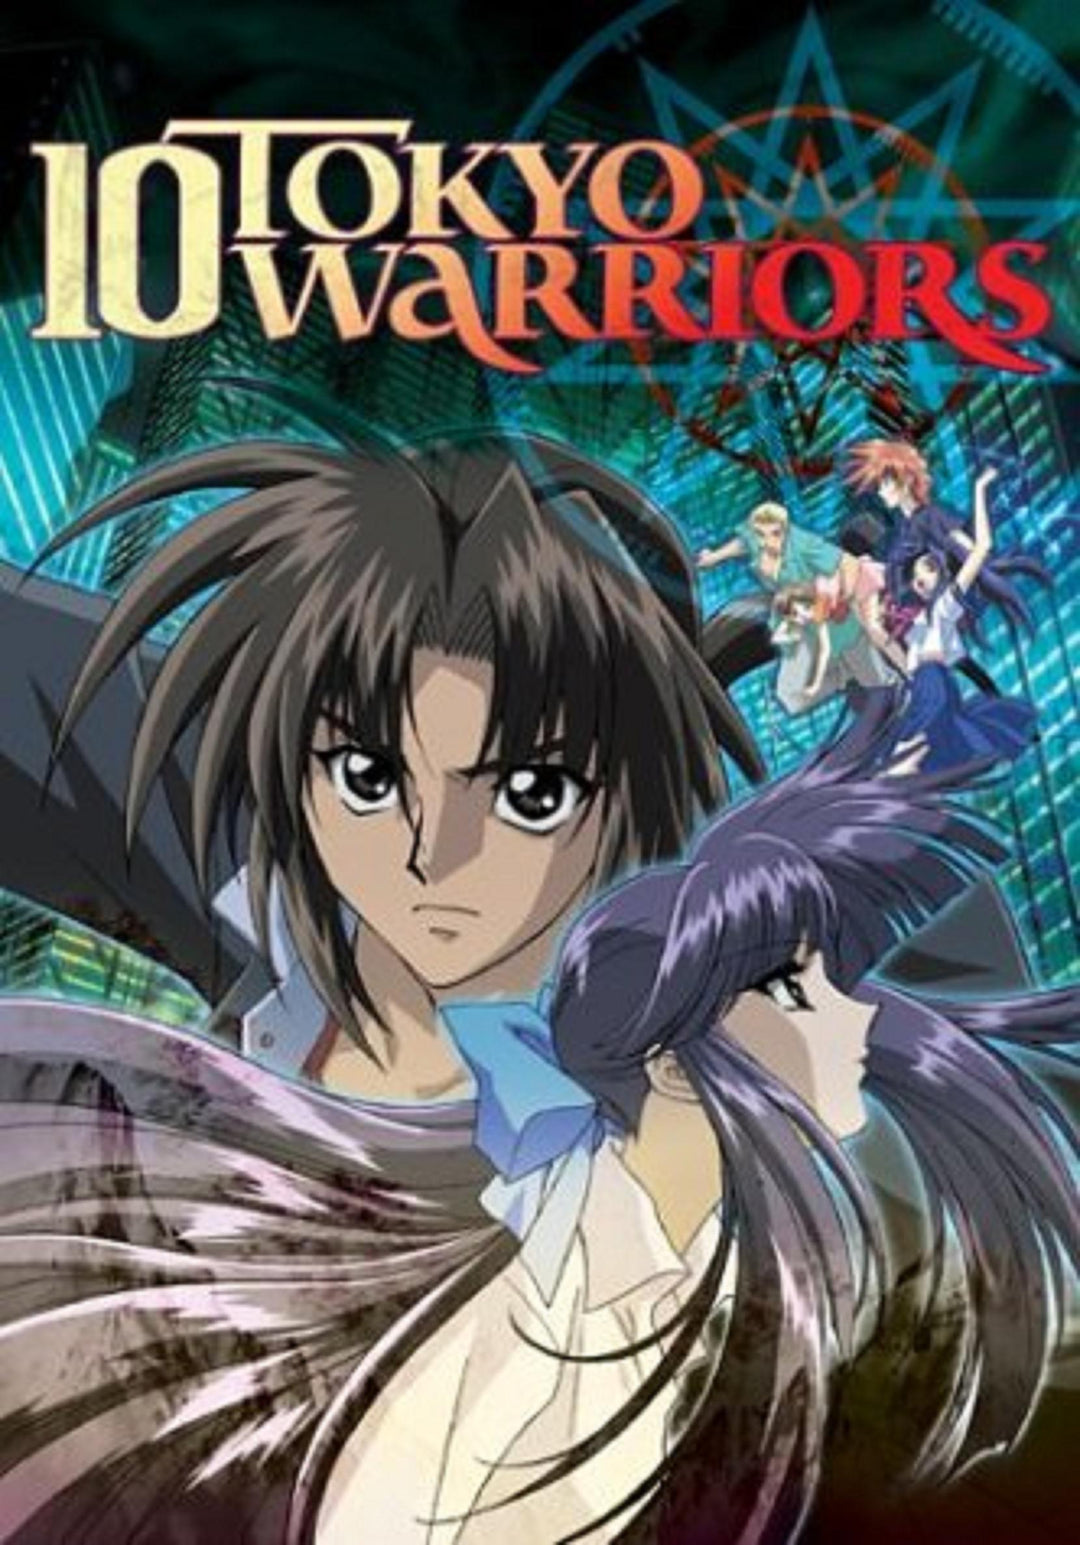 10 Tokyo Warriors (DVD) ~Previously Viewed~